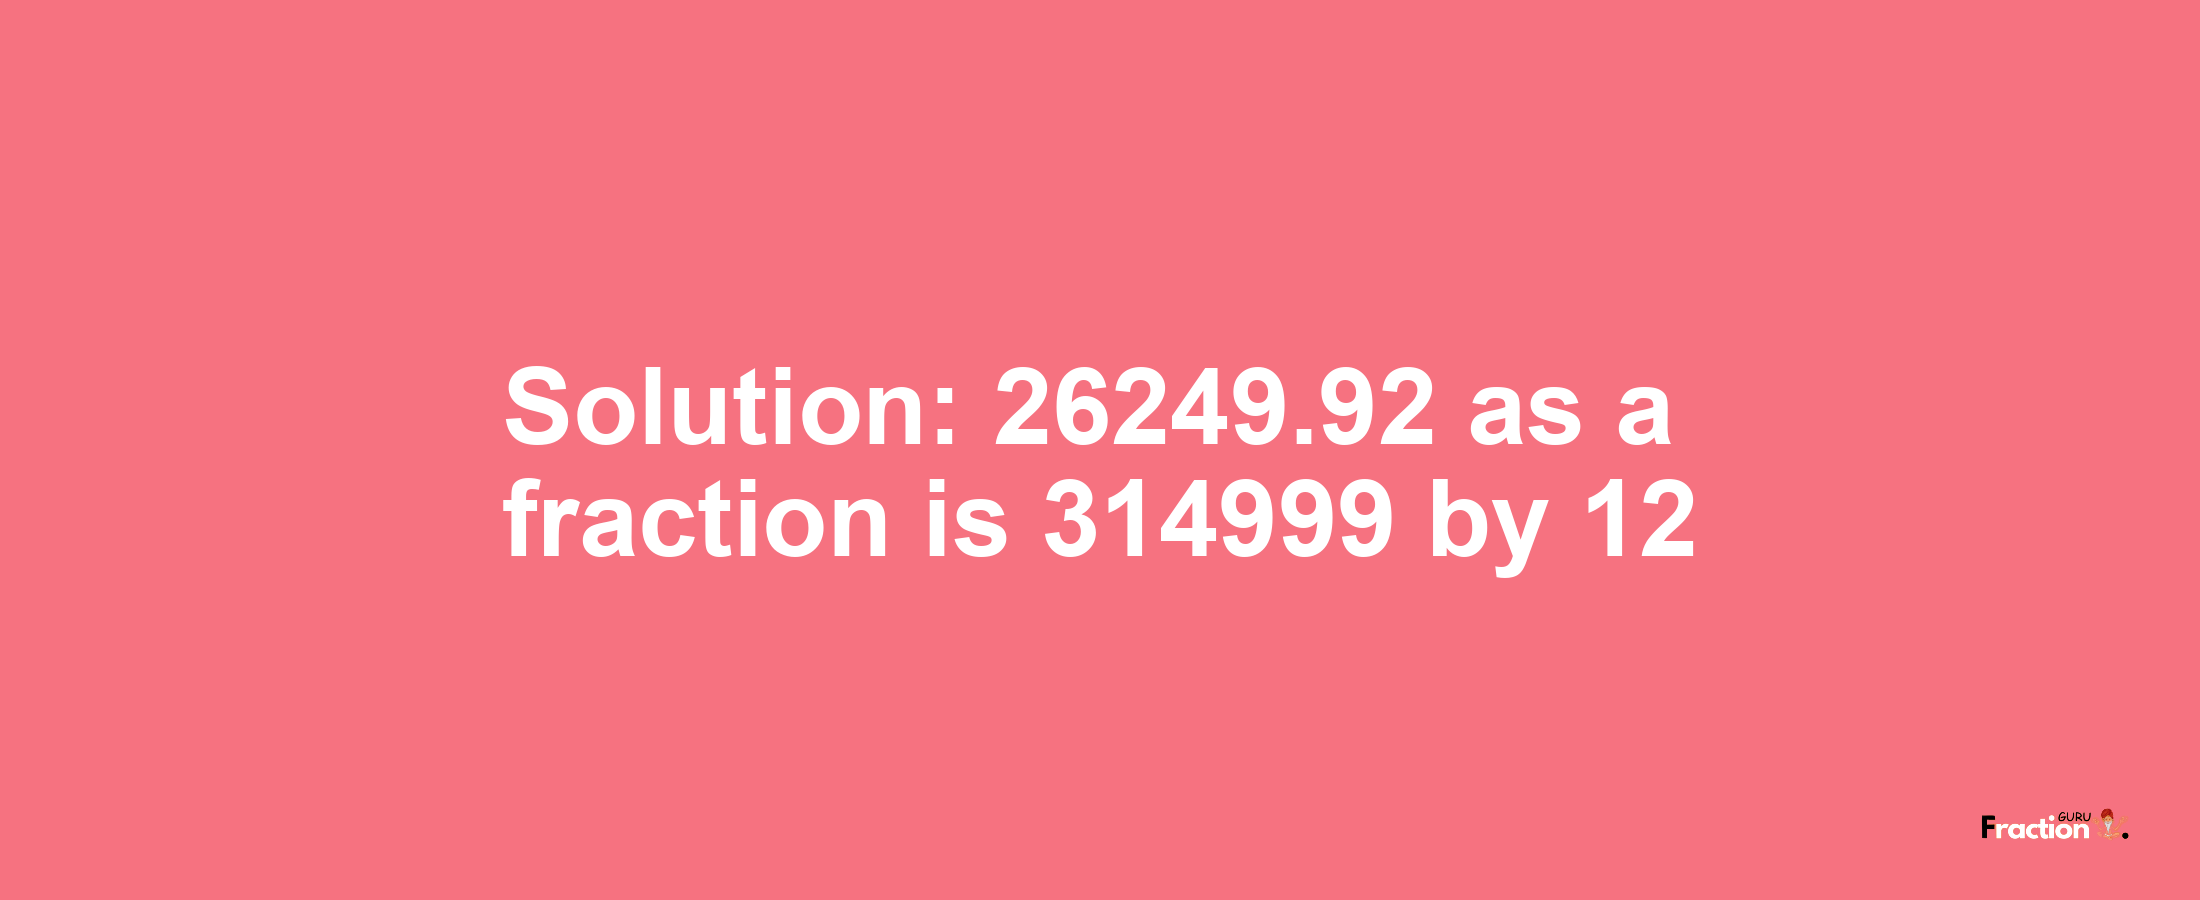 Solution:26249.92 as a fraction is 314999/12